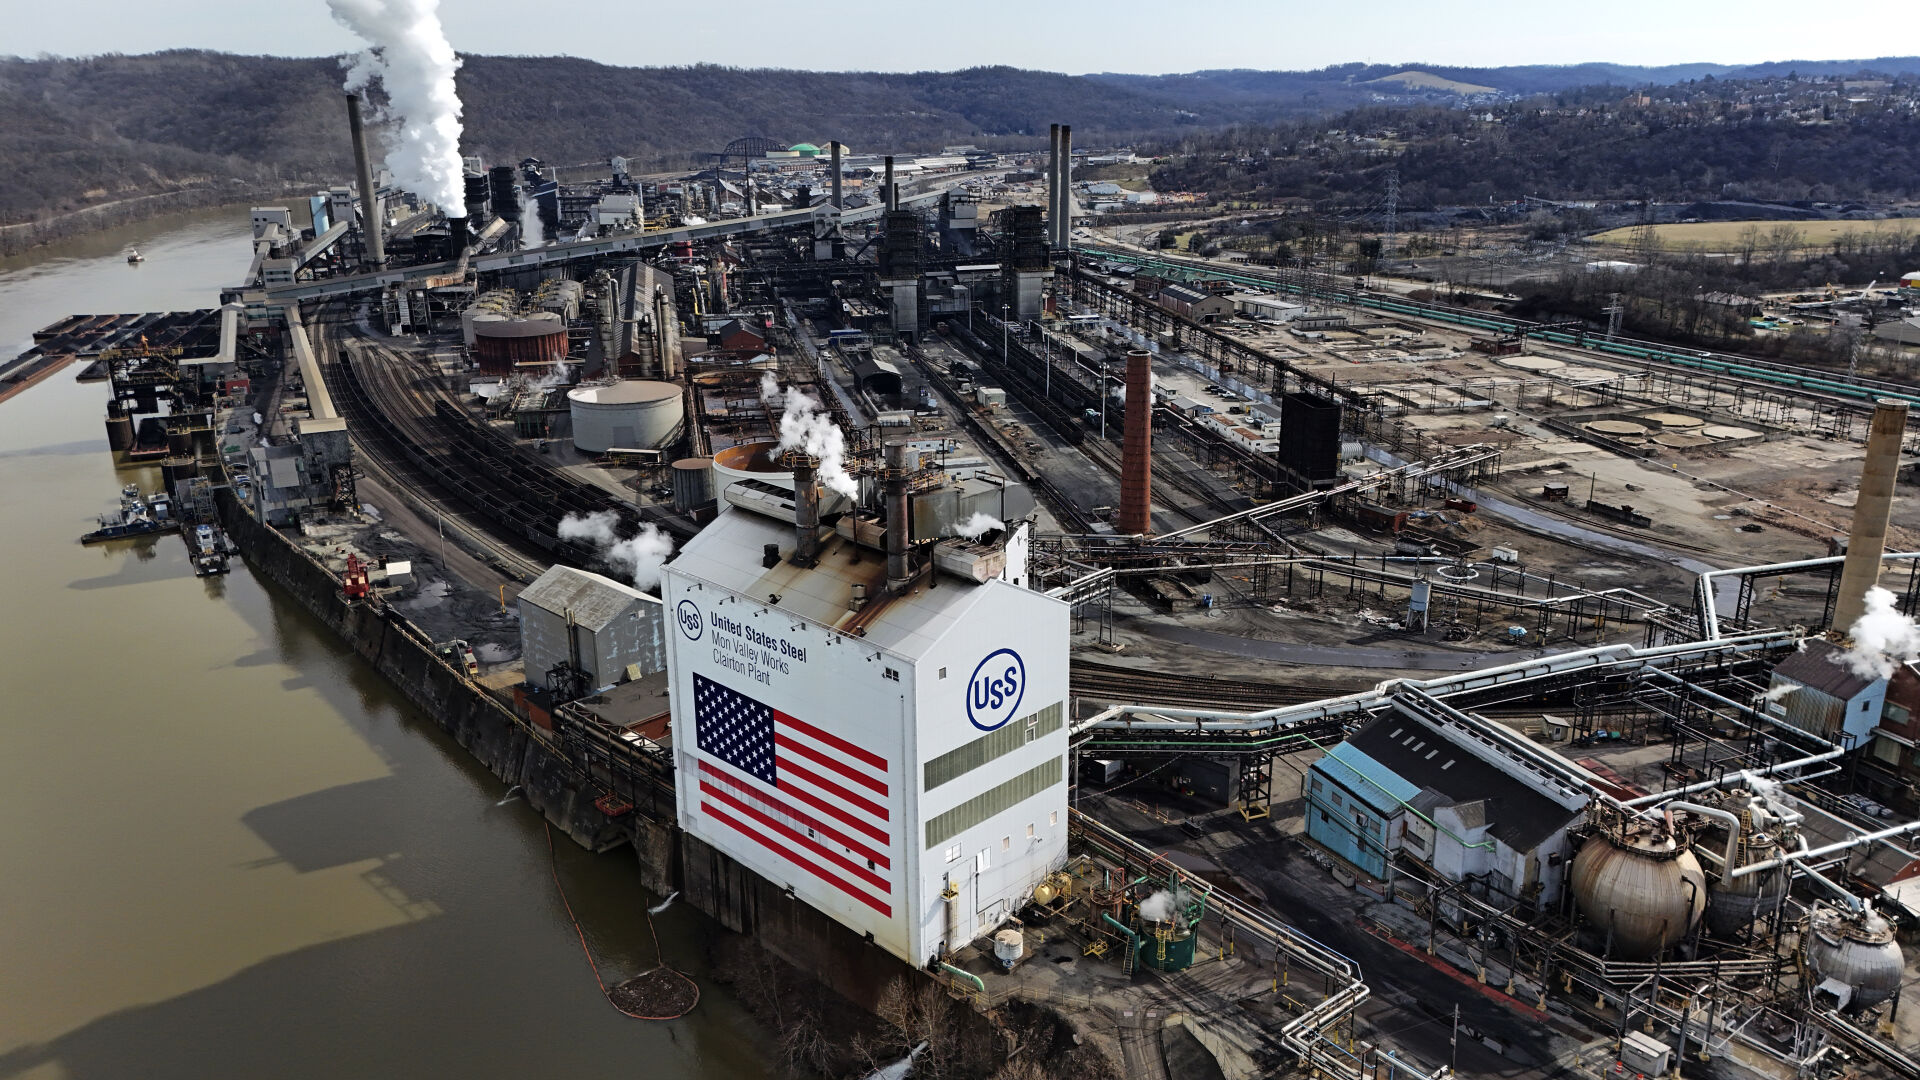 <p>FILE - The United States Steel Mon Valley Works Clairton Plant in Clairton, Pa., is shown on Feb. 26, 2024. President Biden and Donald Trump agree on essentially nothing, from taxes and climate change to immigration and regulation. Yet on trade policy, the two presumptive presidential nominees have embraced surprisingly similar approaches. (AP Photo/Gene J. Puskar, File)</p>   PHOTO CREDIT: Gene J. Puskar